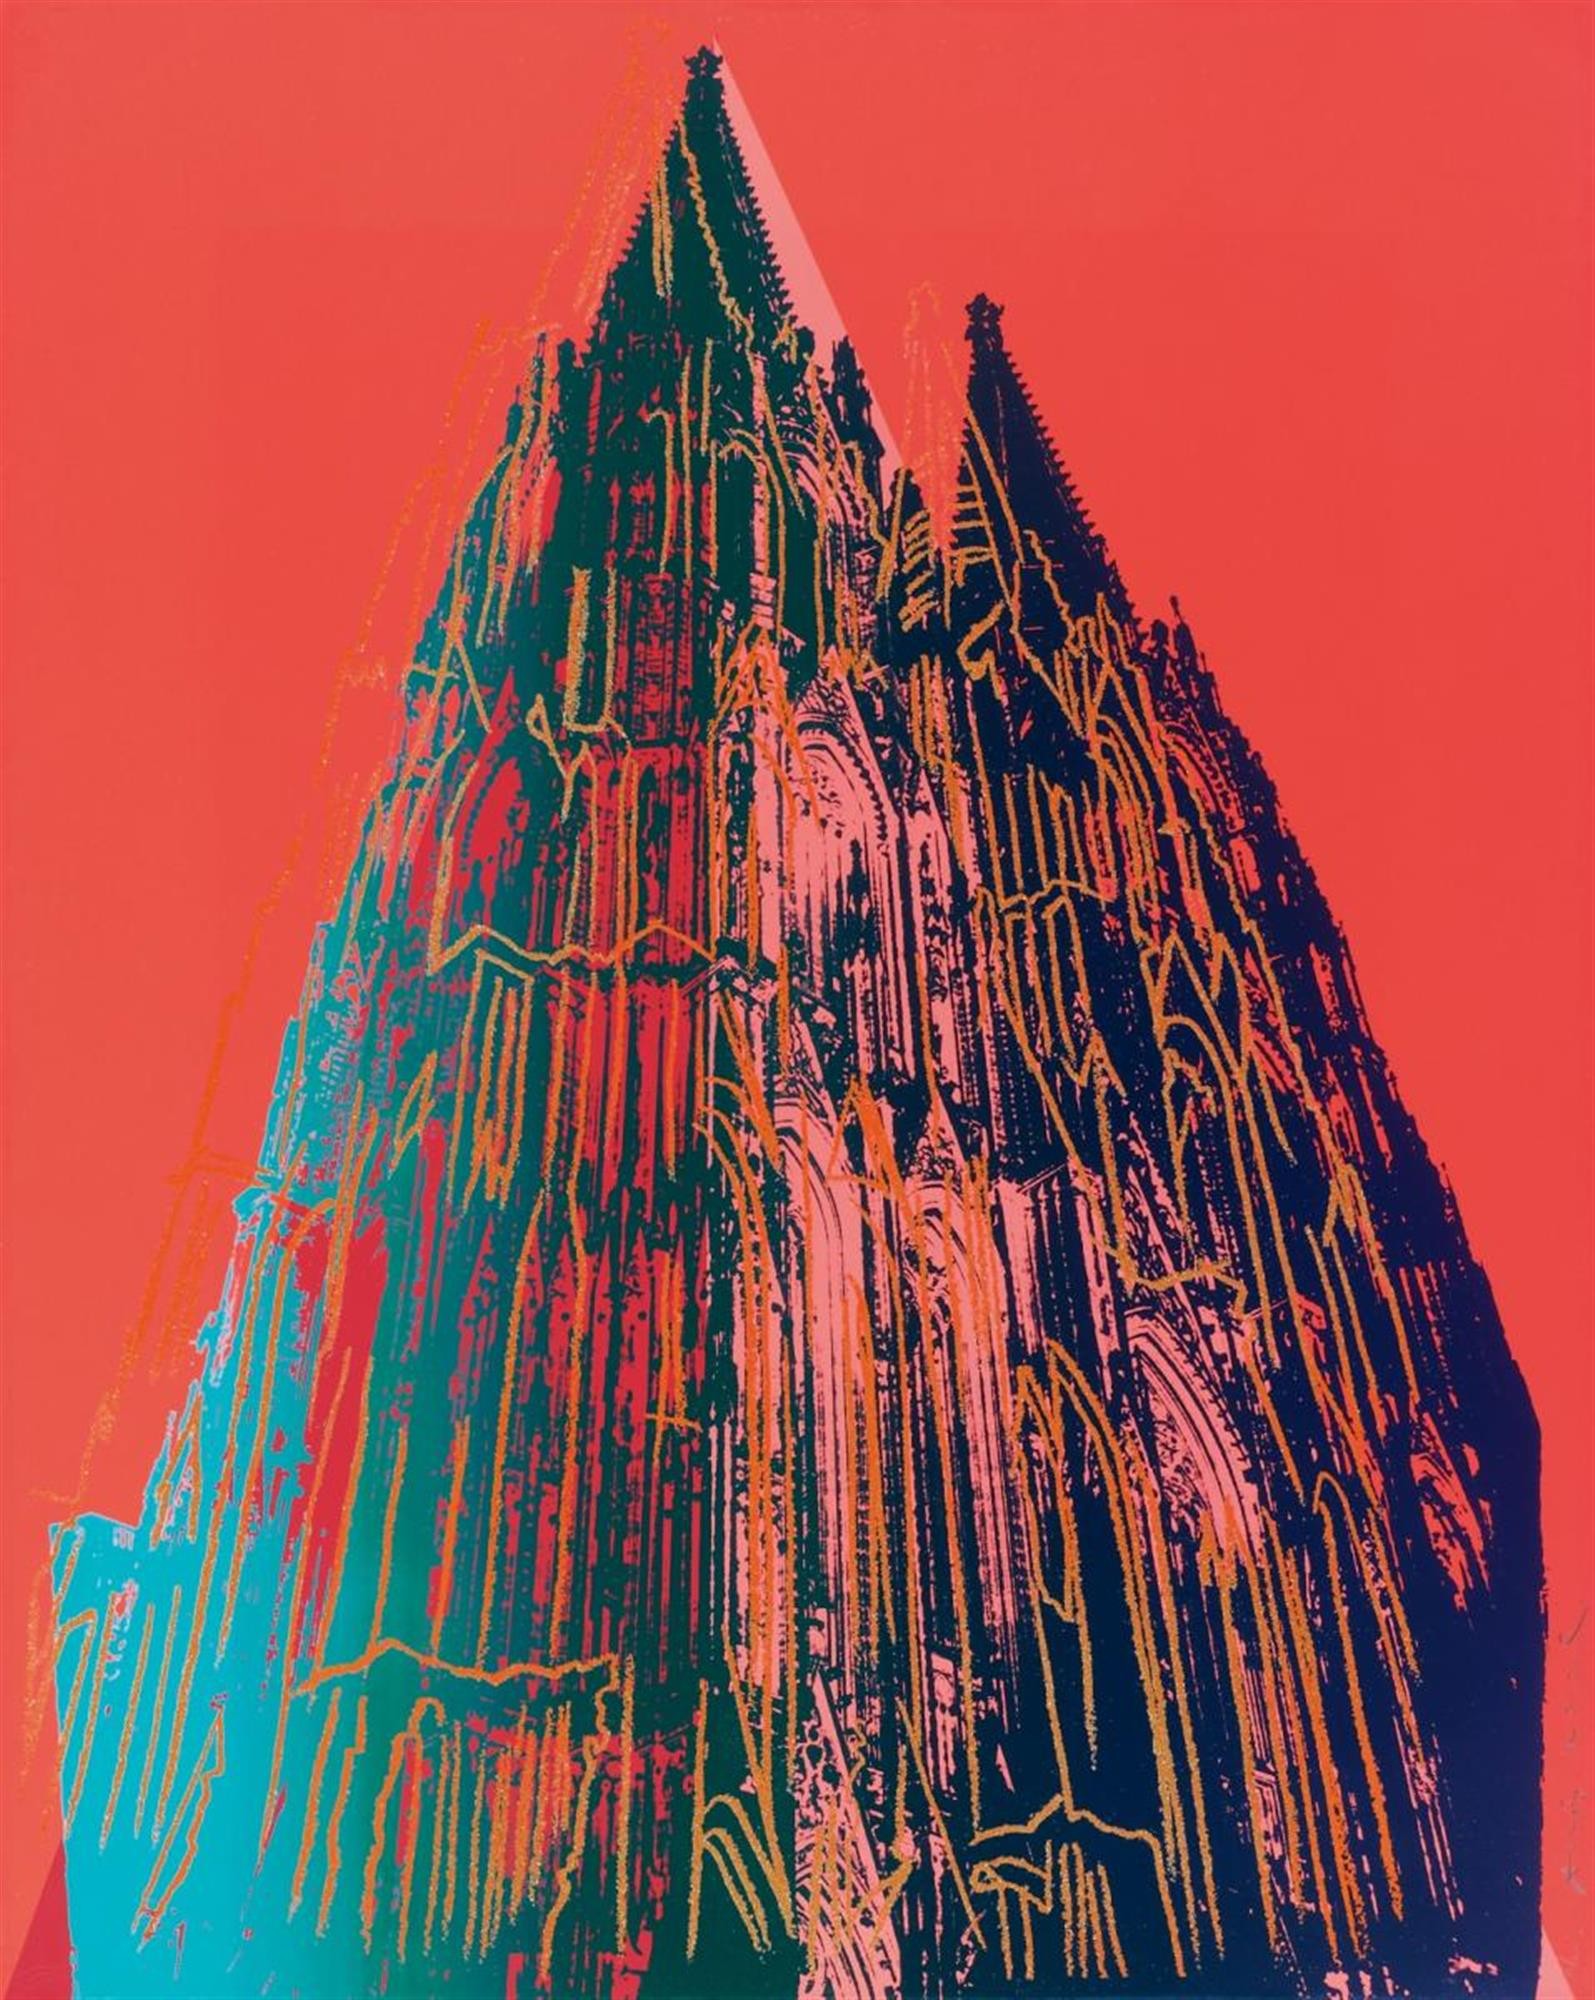 Andy Warhol | Cologne Cathedral | 361 | 1985 | Image of Artists' work.